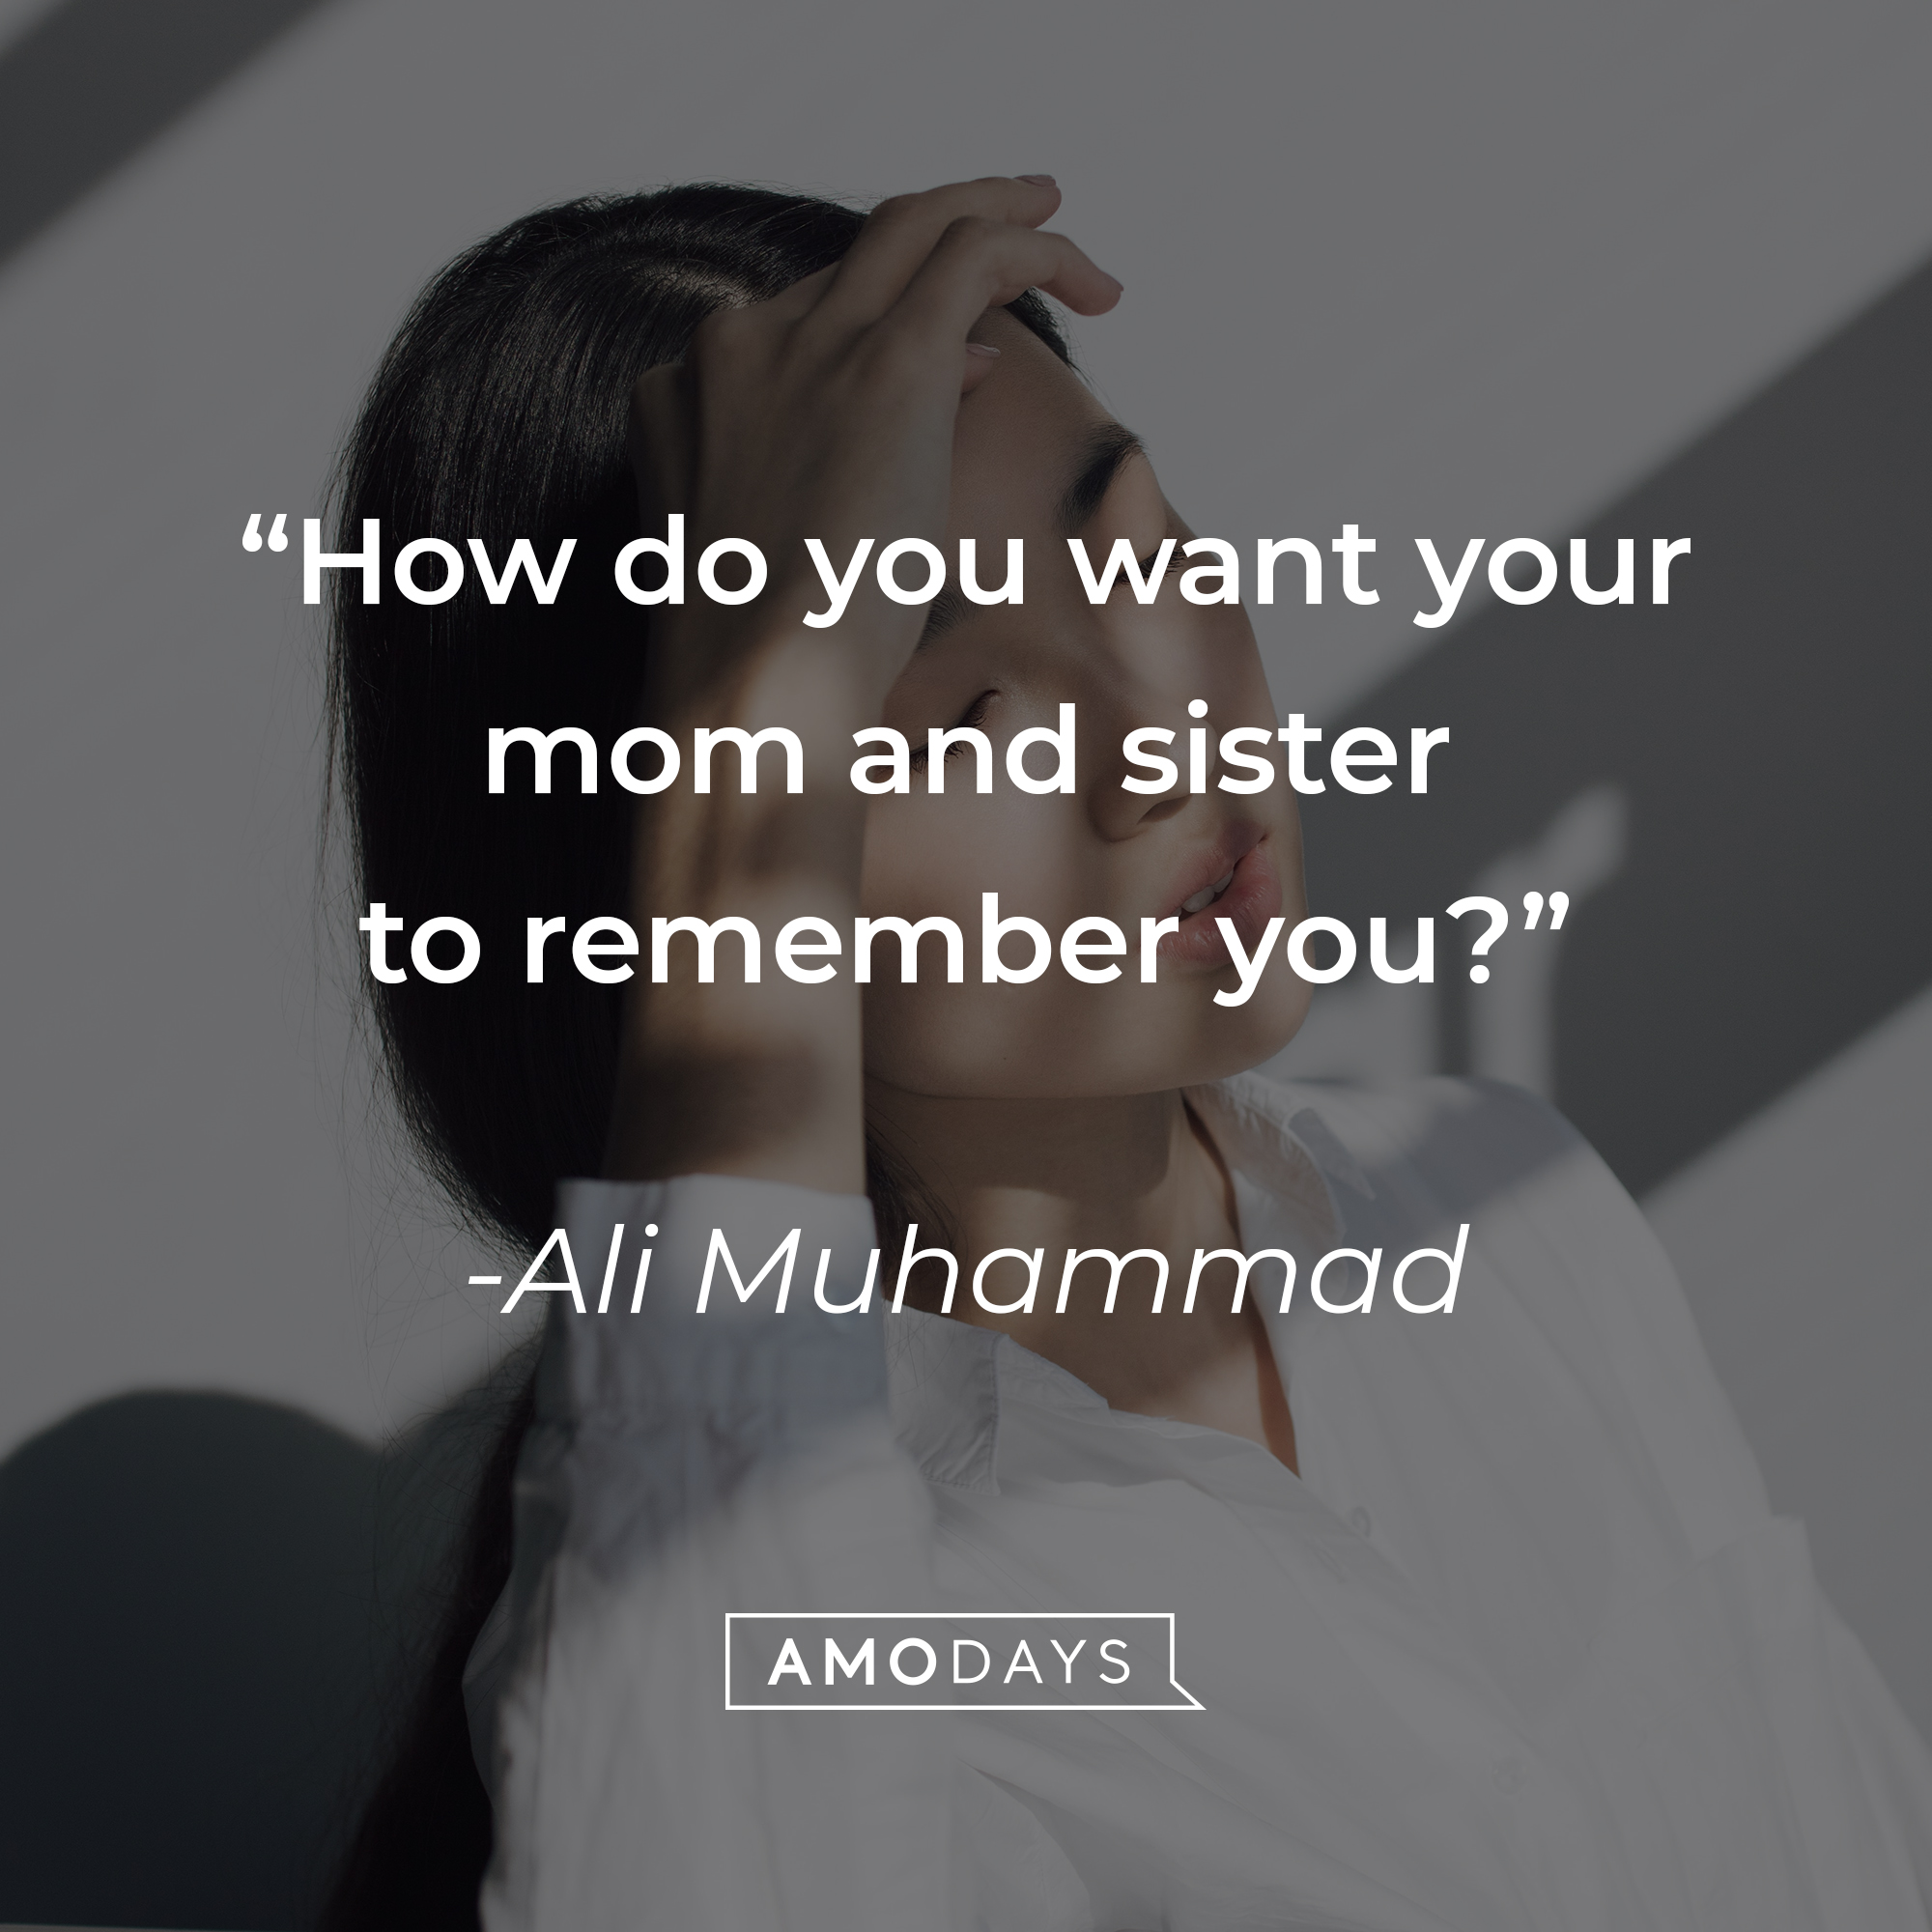 Ali Muhammad's quote: "How do you want your mom and sister to remember you?" | Source: unsplash.com